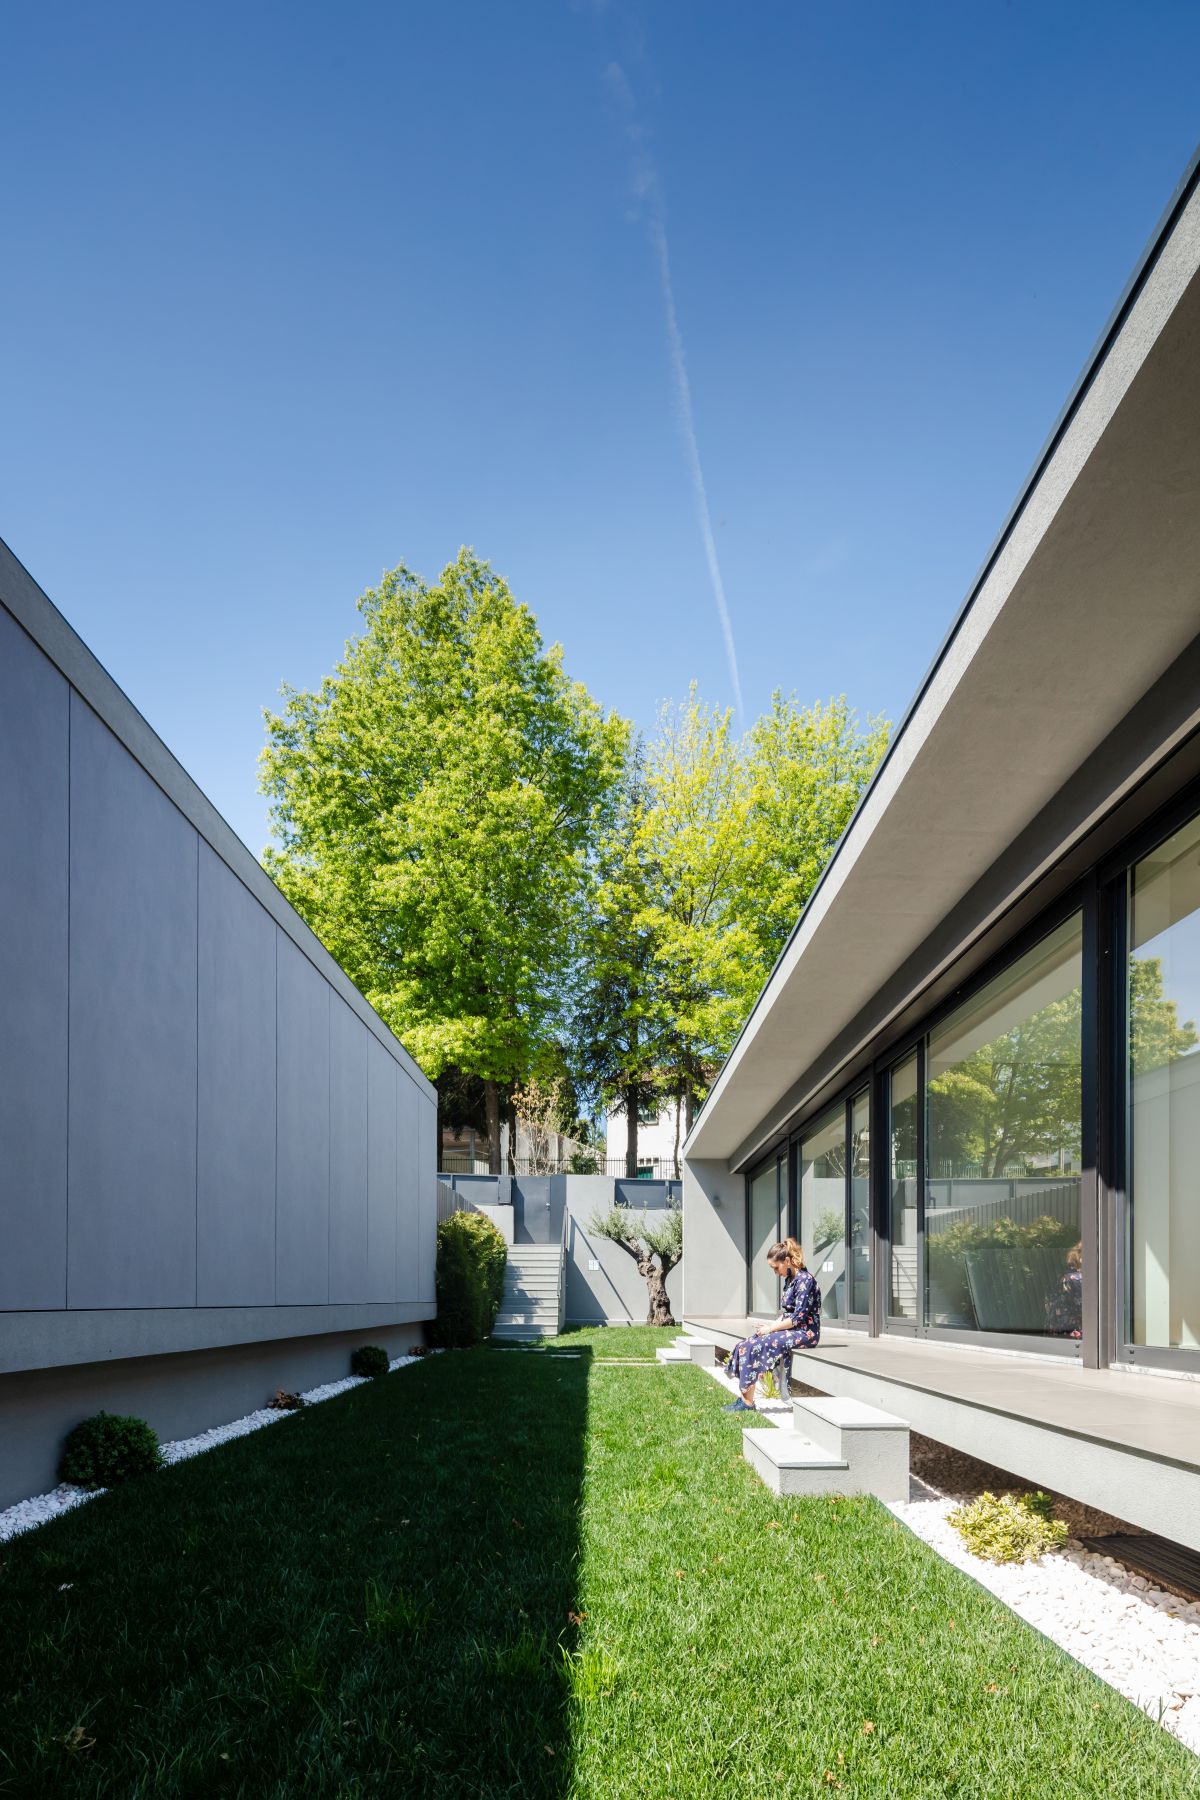 Each house also opens onto the small courtyard between it and the neighboring residence